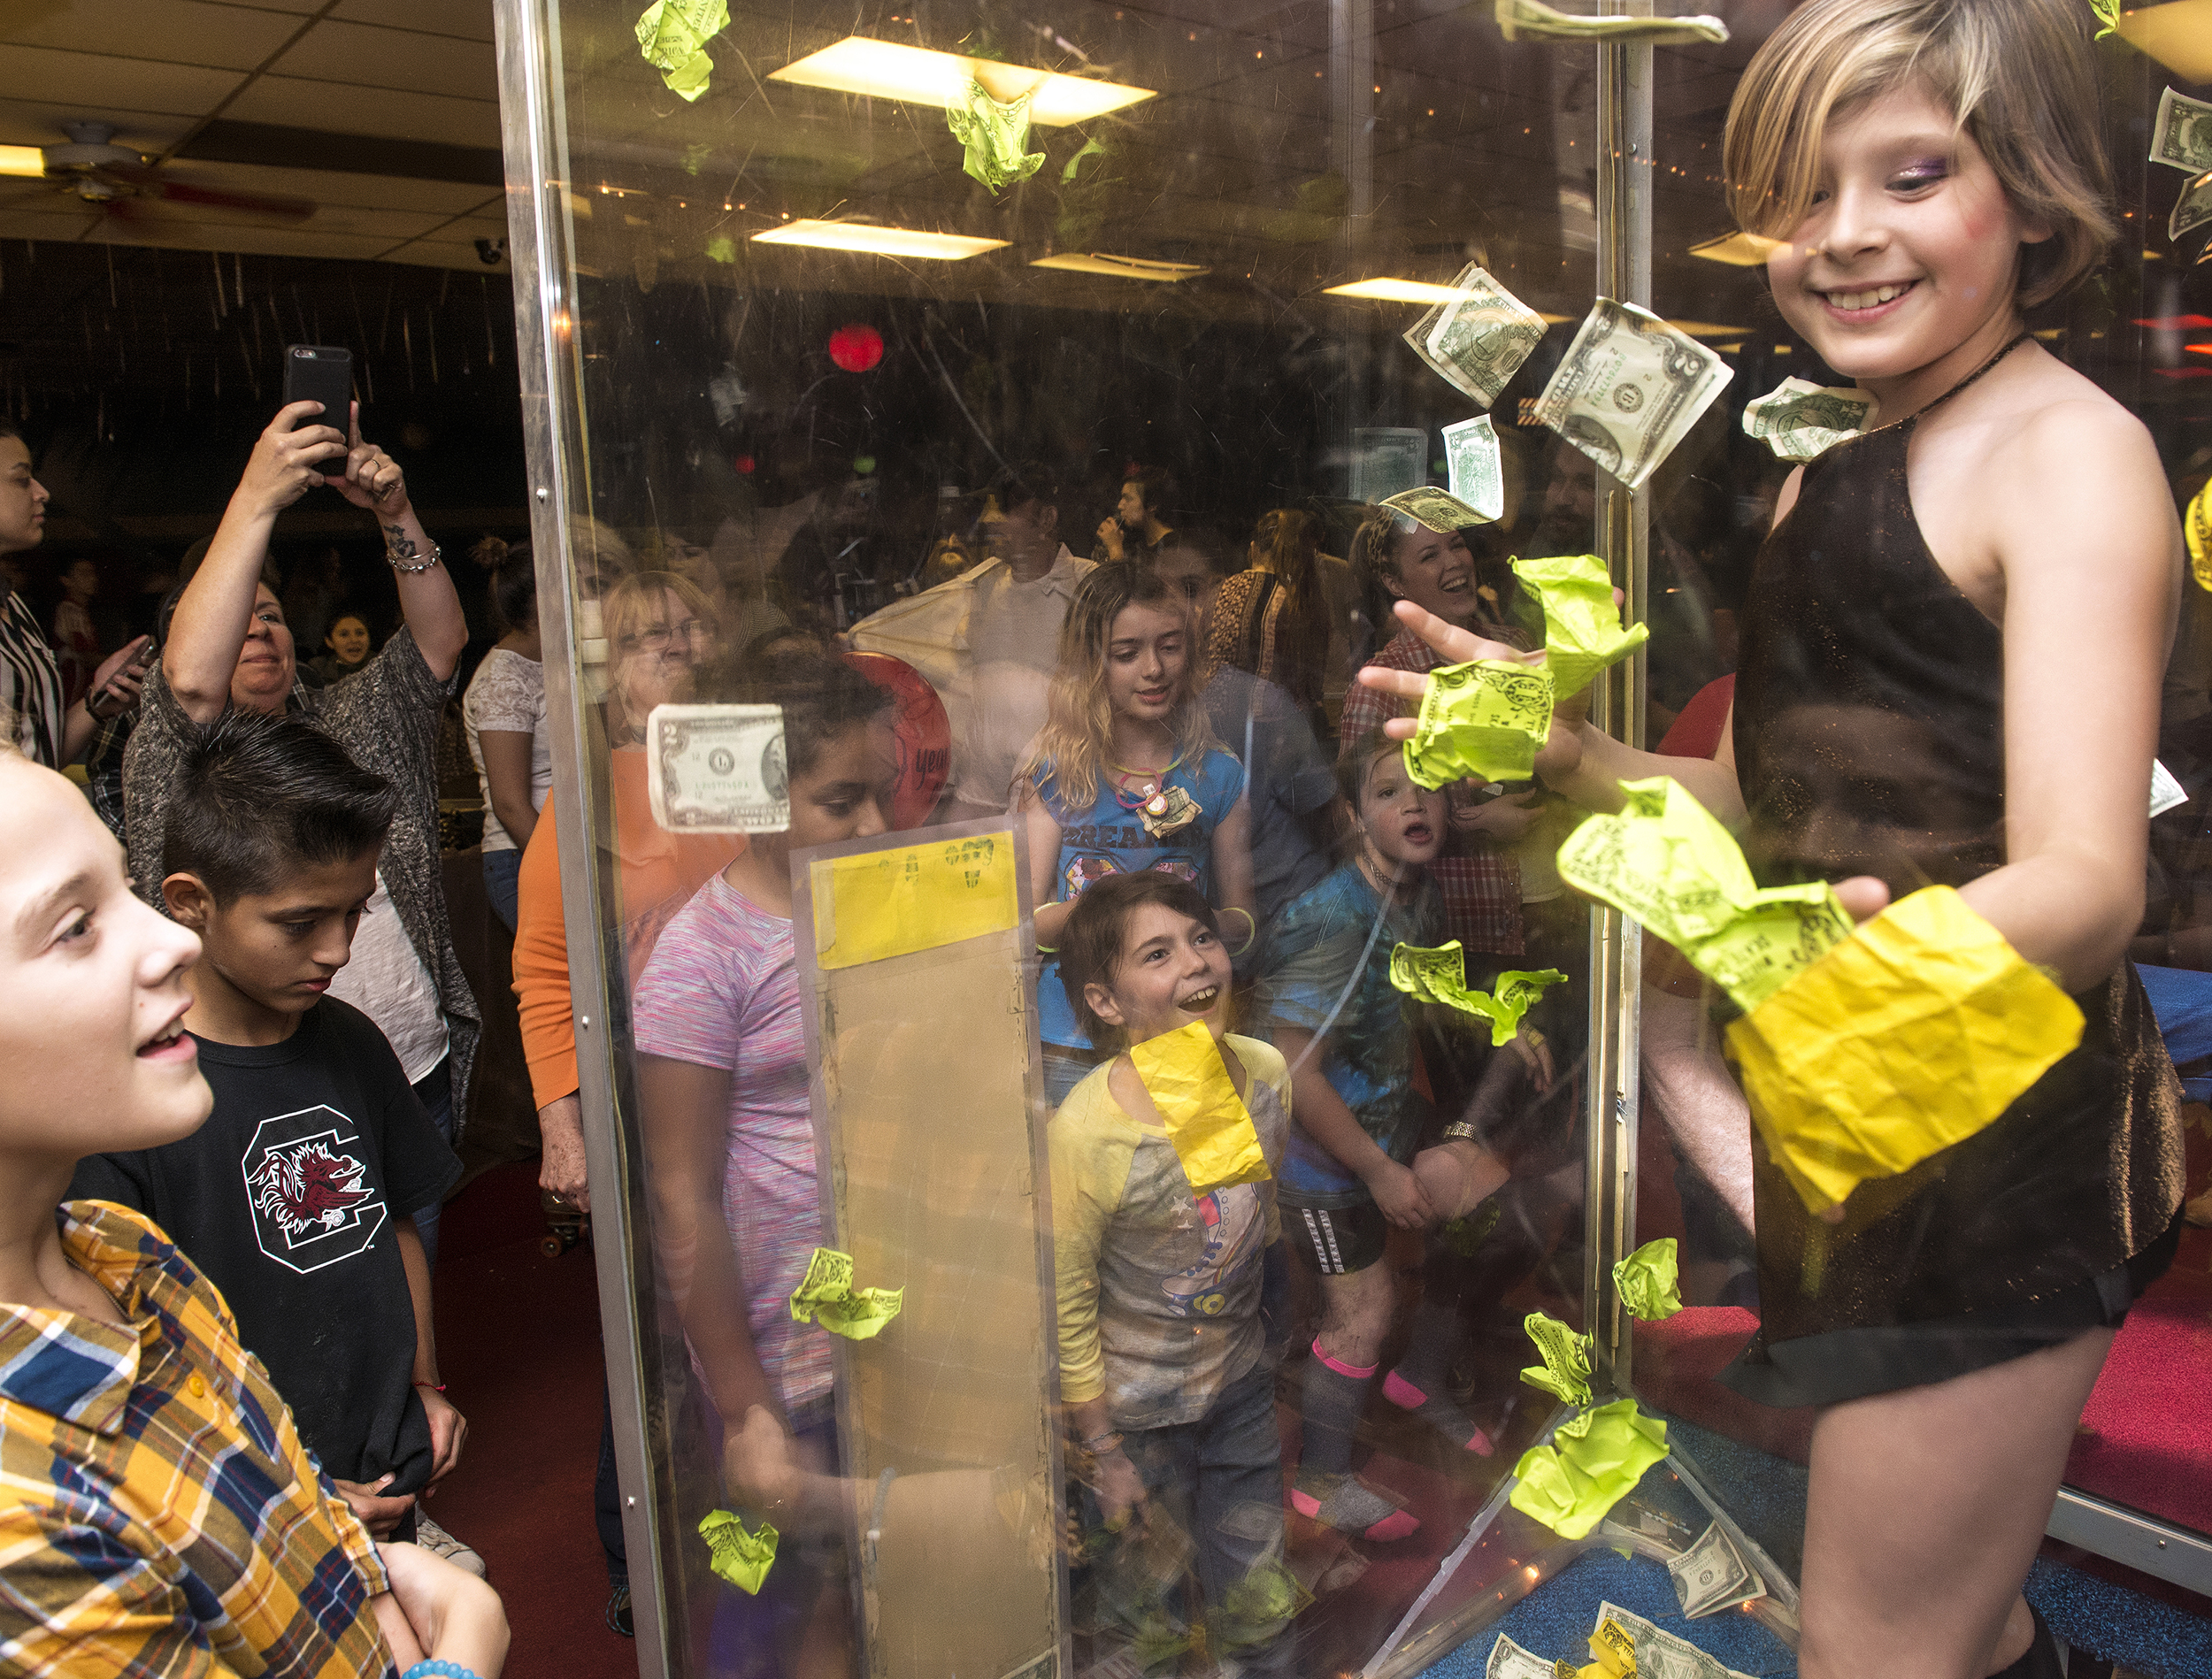  A girl attempts to snag bills in the money booth at White Rock Skate’s last hoorah in the Lake Highlands neighborhood in Dallas, TX.  Built in 1973, White Rock Skate became a local institution for generations of fun-loving, rollerskating children an